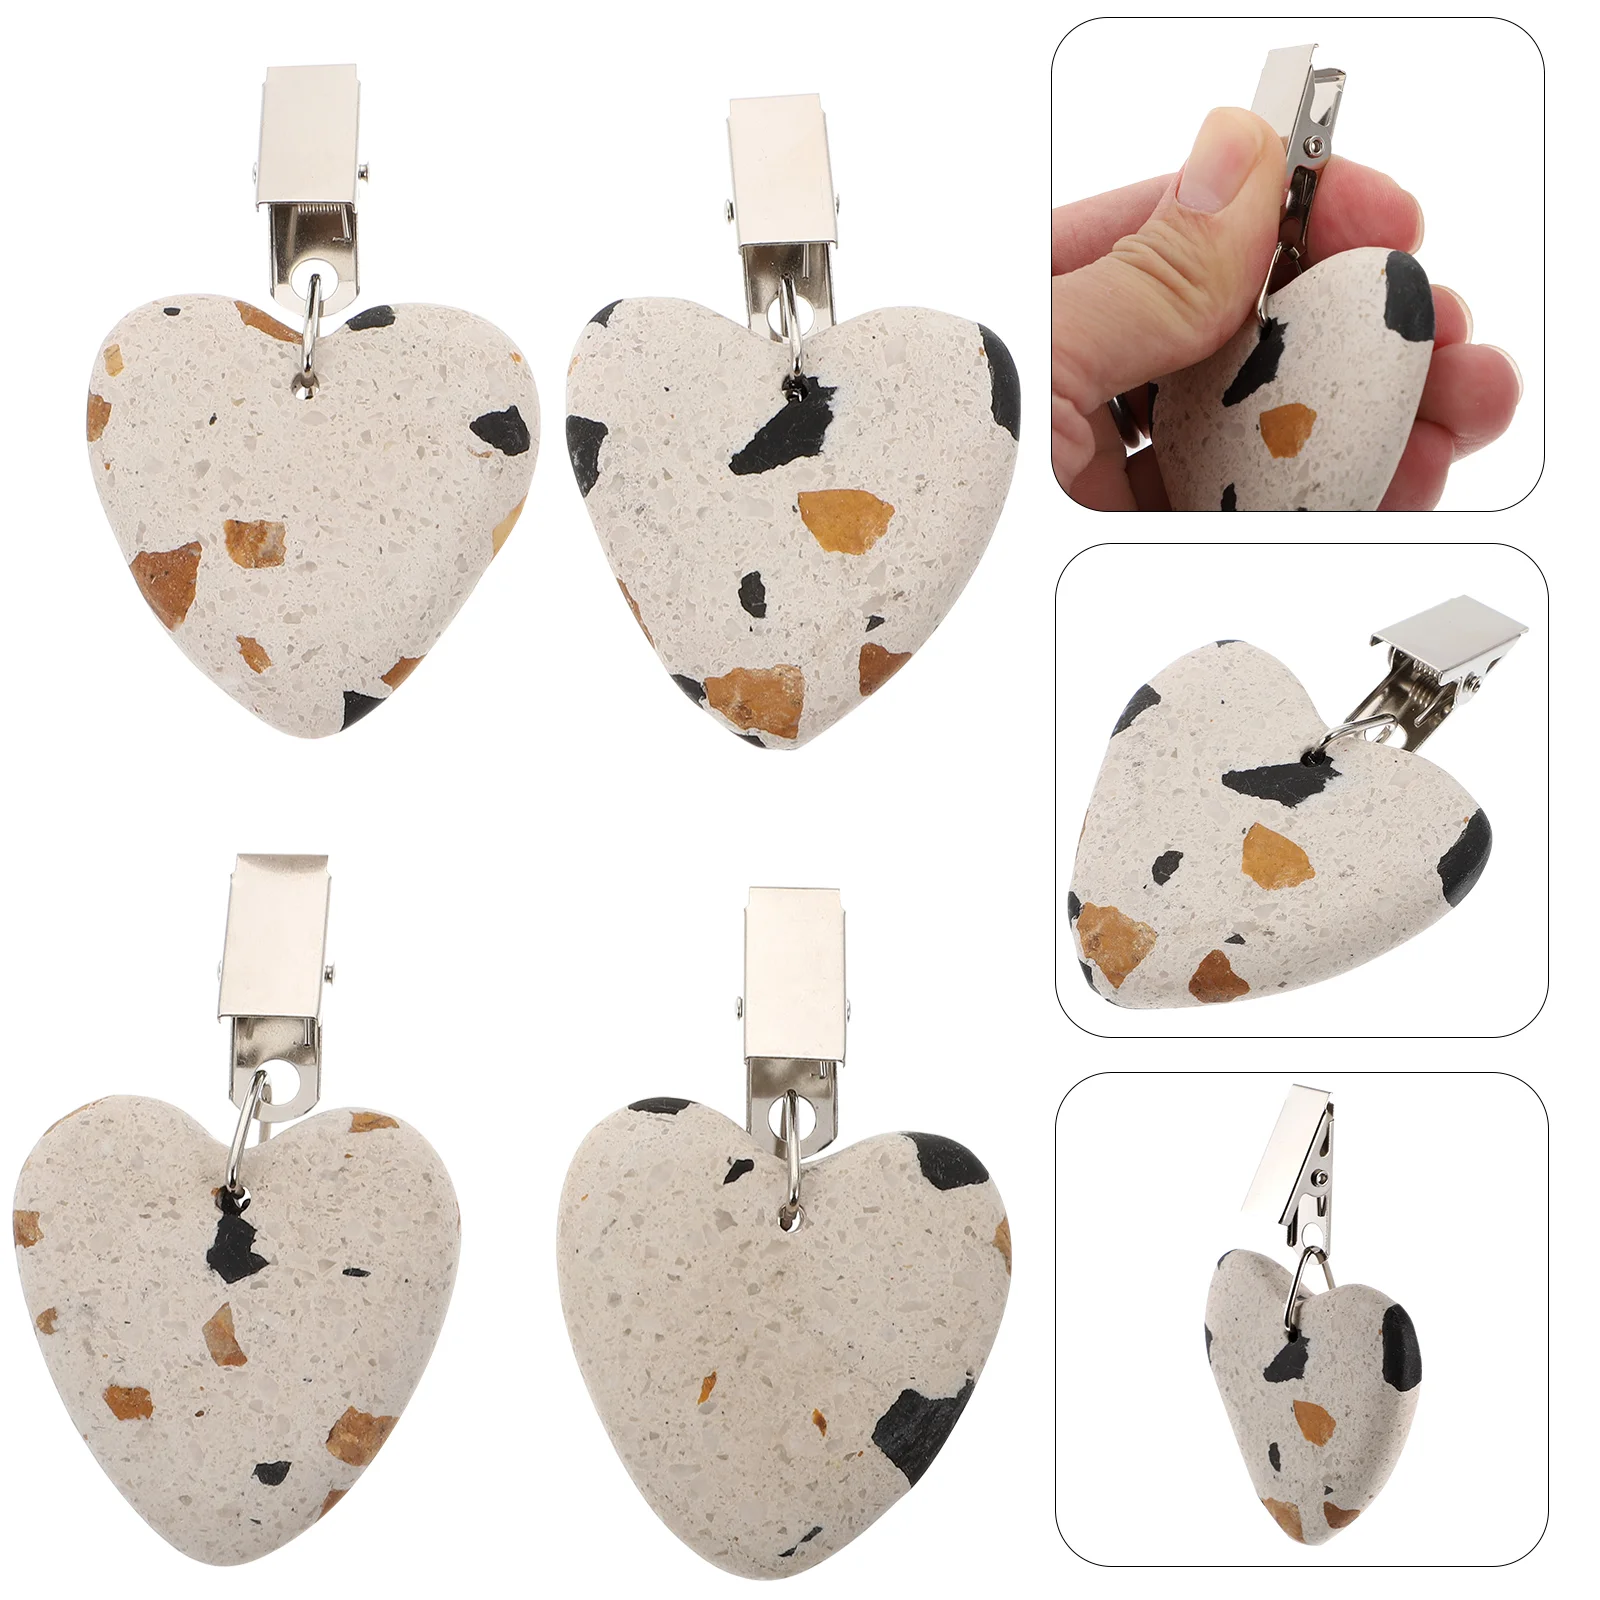 4Pcs Tablecloth Pendants With Metal Clip Tablecloth Heart Shaped Stone Weights With Clip For Picnics Wedding Party Decorations